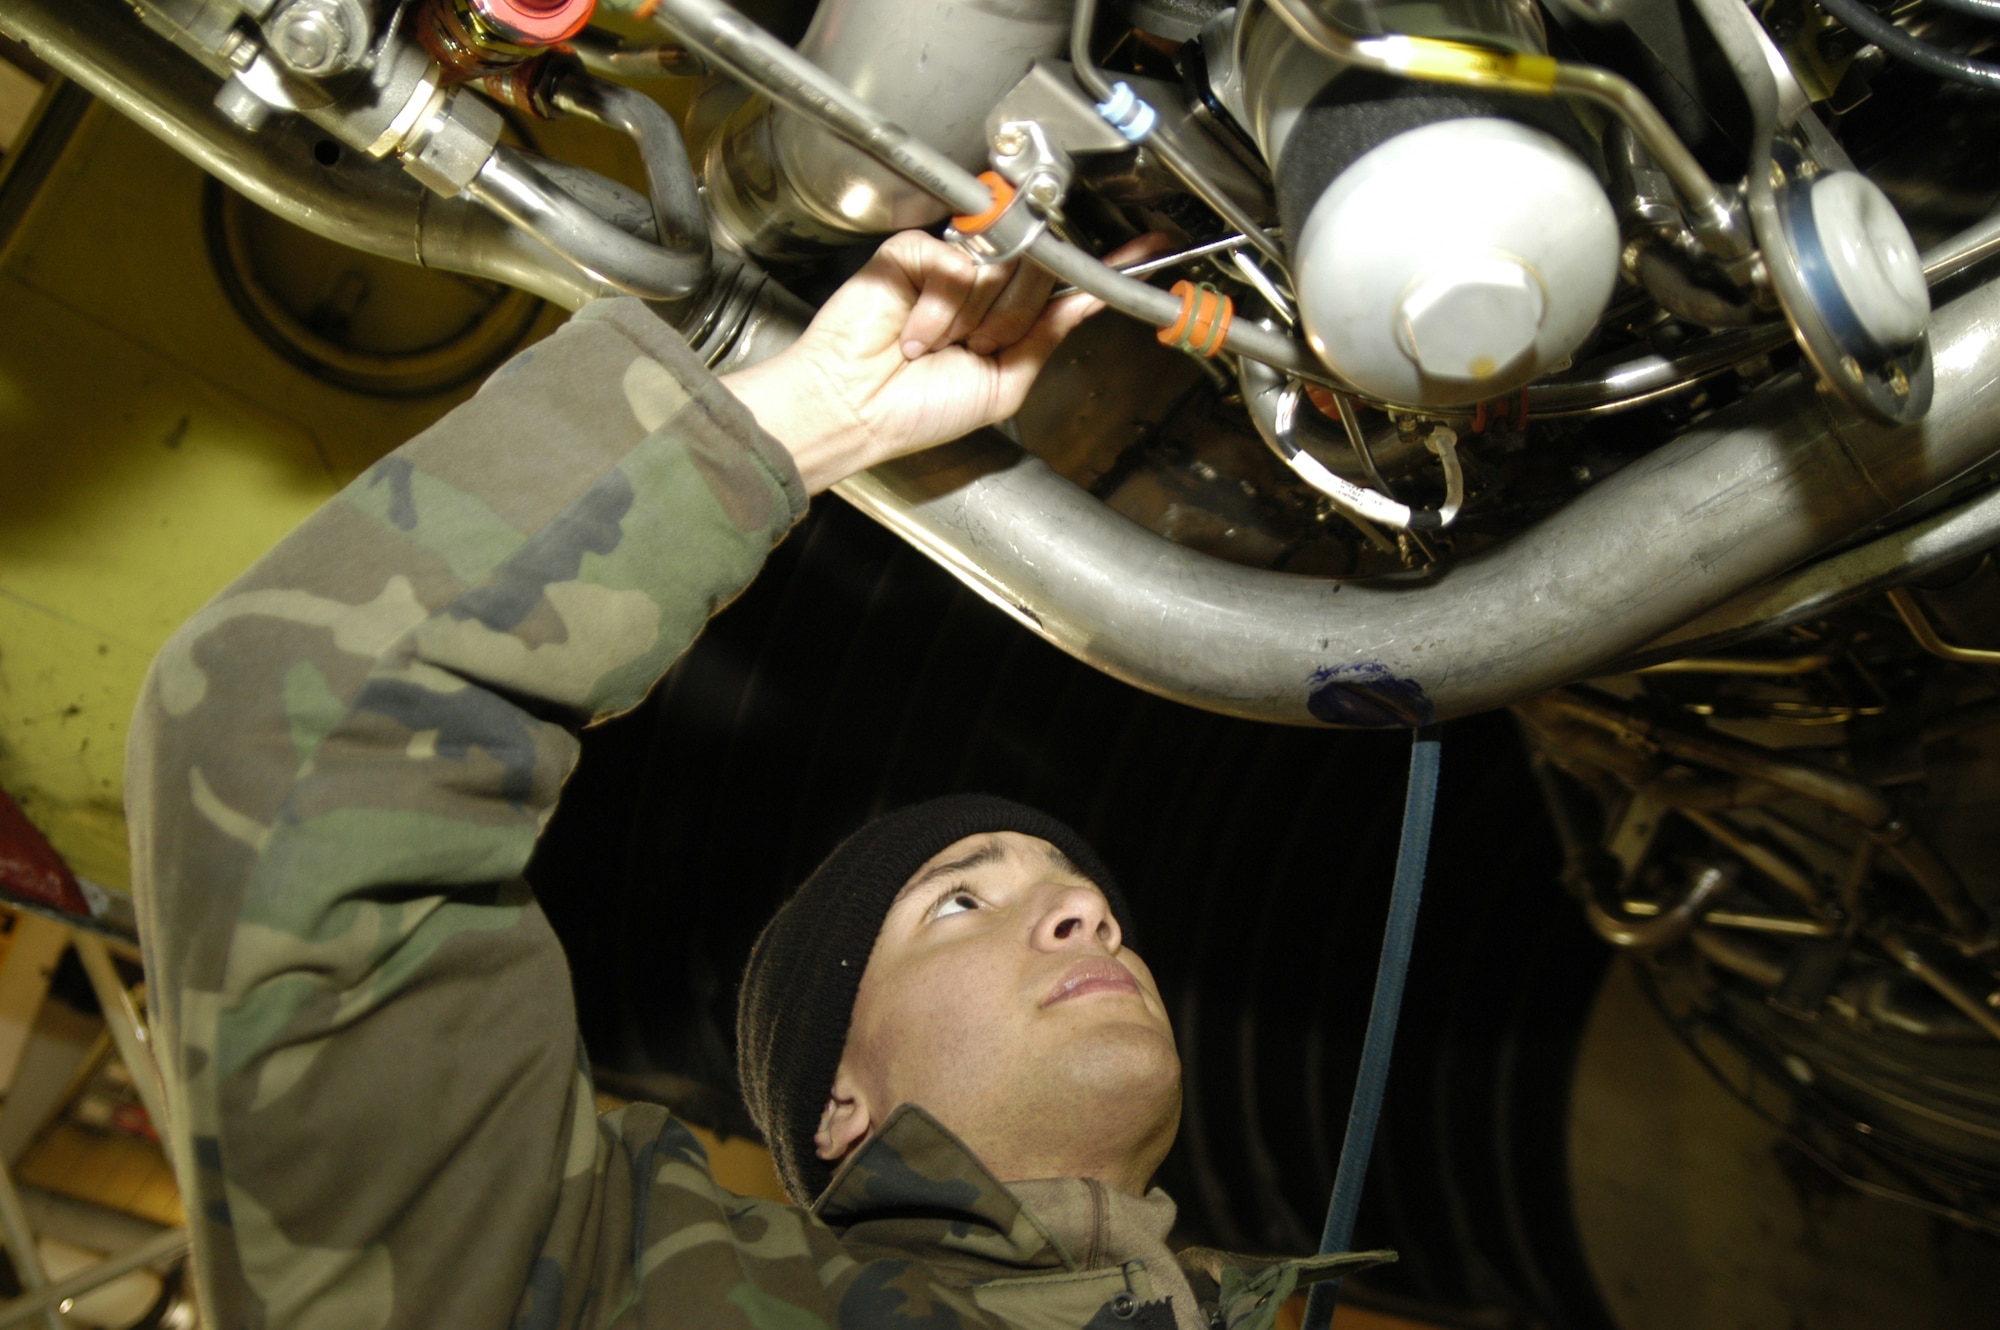 DOVER AIR FORCE BASE, Del. -- Senior Airman Matthew Mendes, 436th Maintenance Squadron Test Cell journeyman, tightens a bolt on a TF-39 engine. (U.S. Air Force photo/Senior Airman James Bolinger)                                